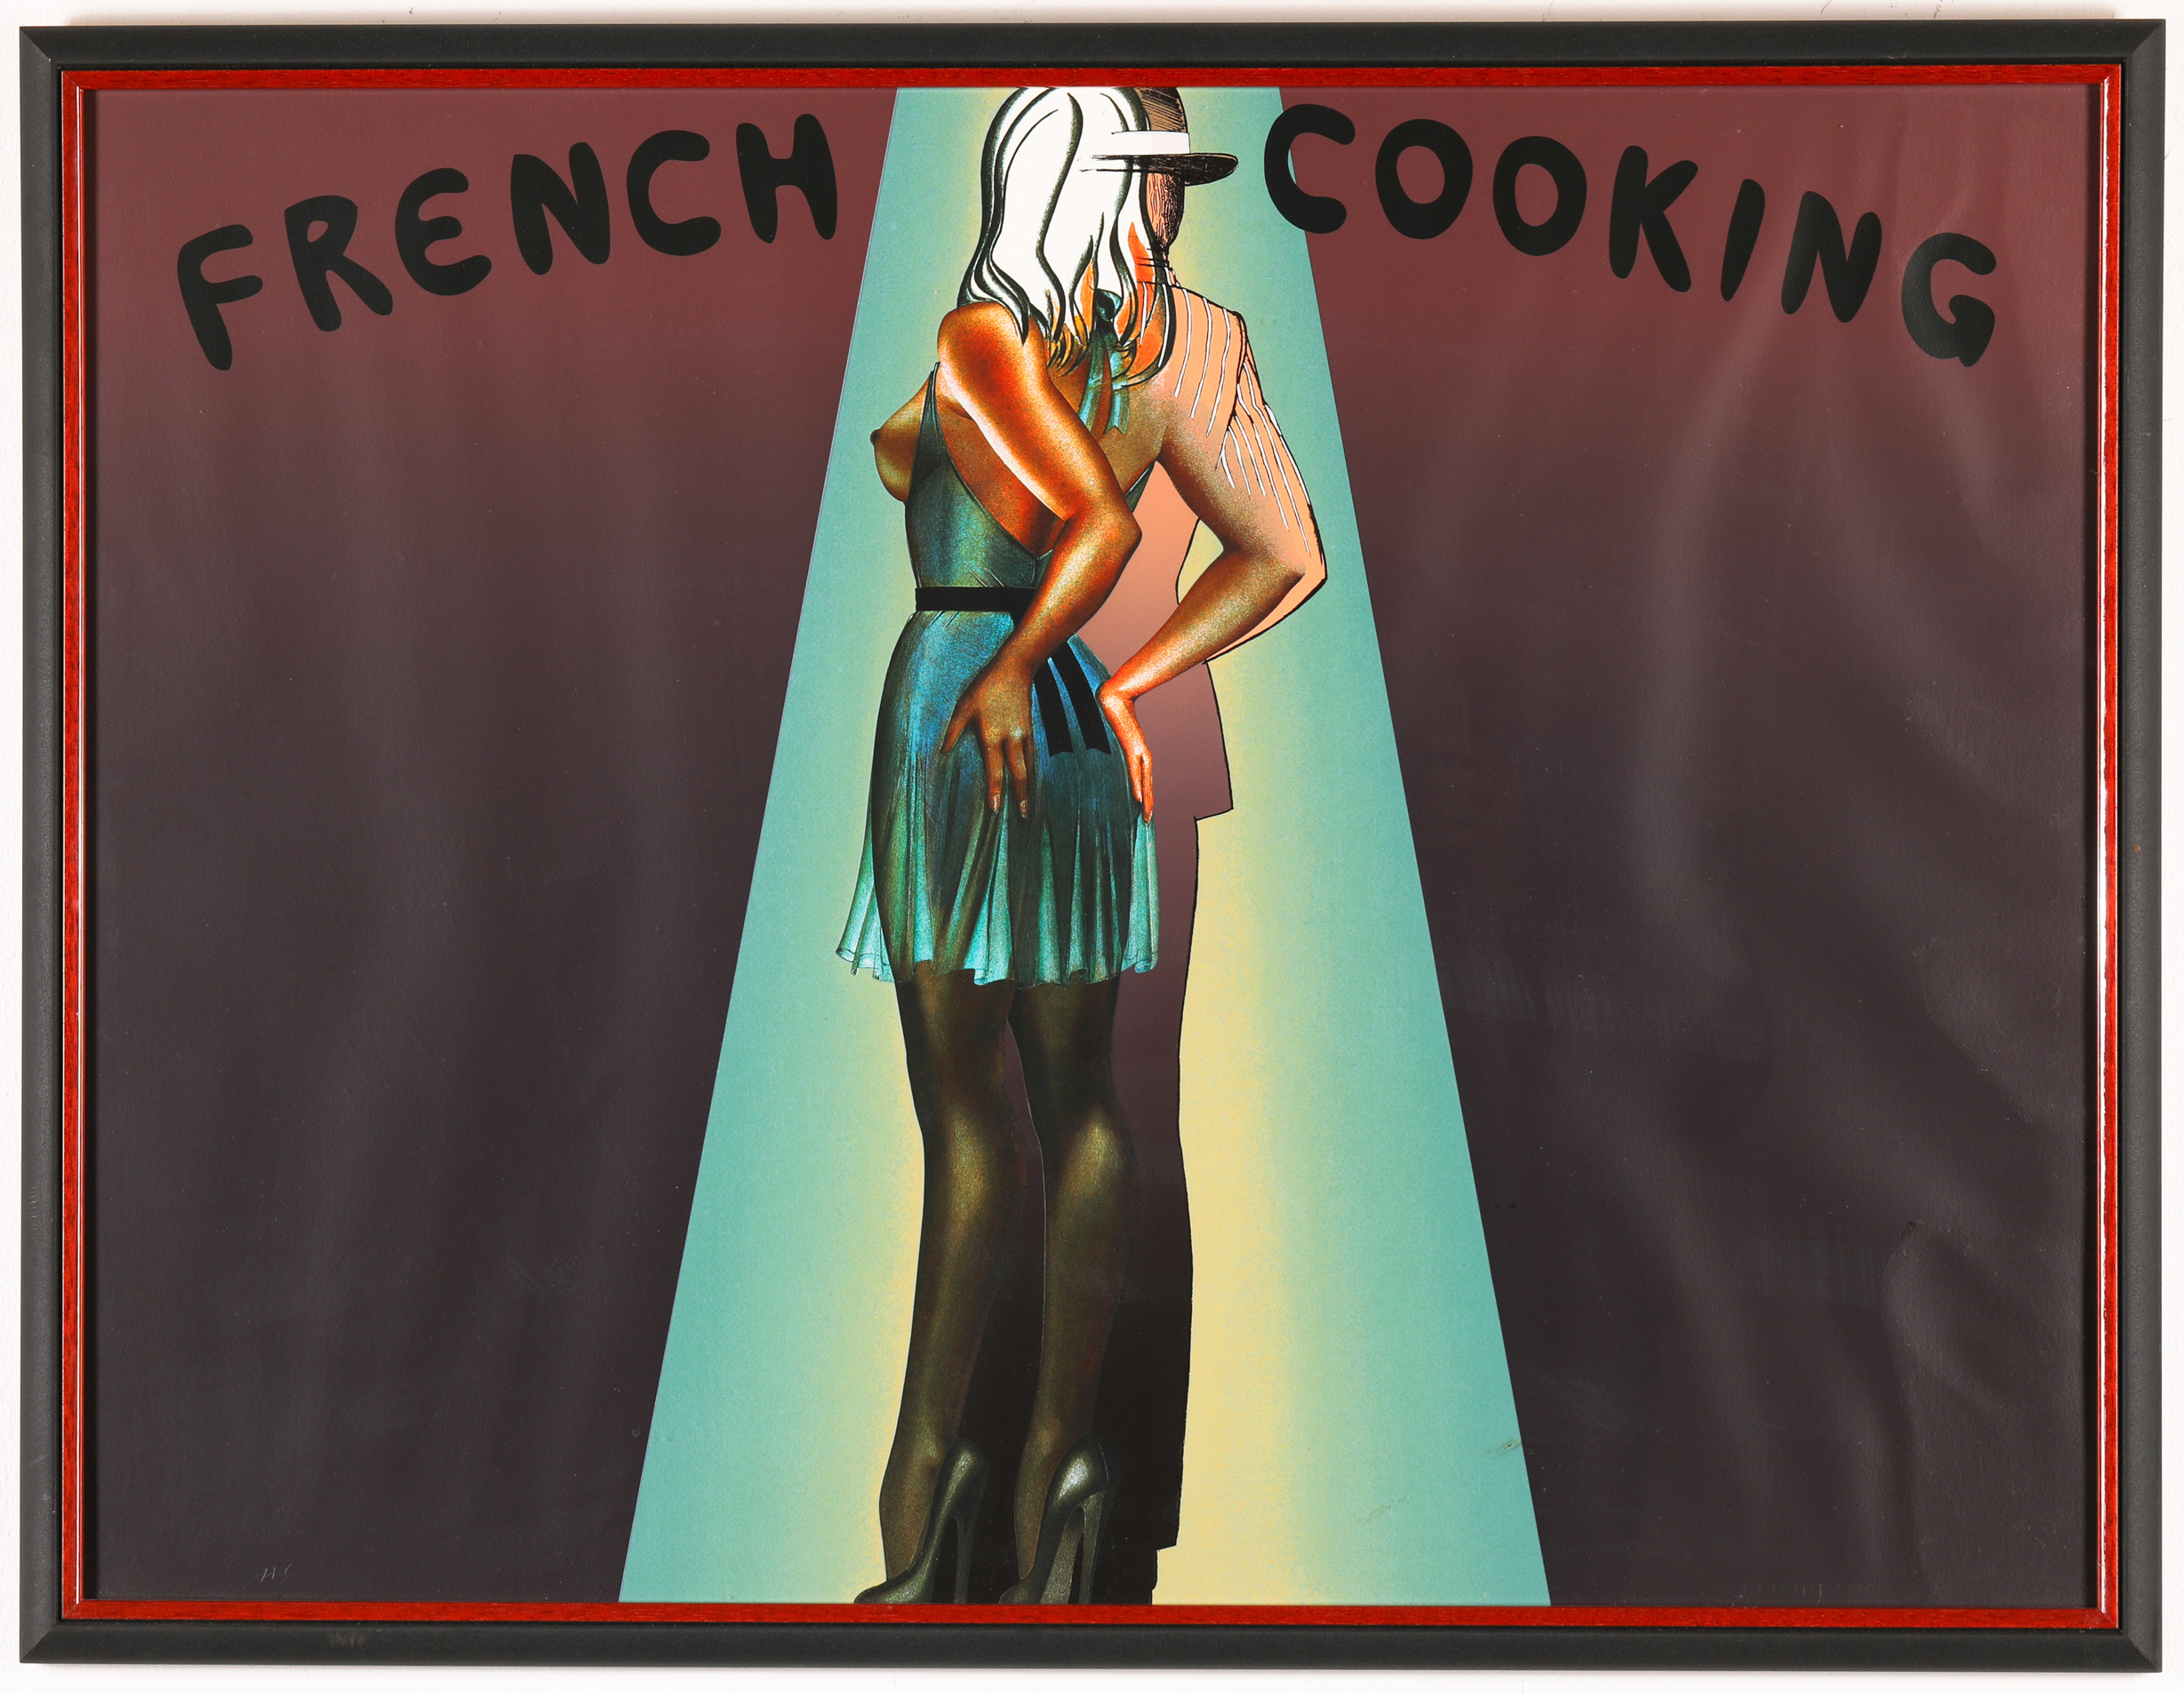 Allen Jones*, French Cooking (from: Hommage à Picasso), 1973, HC print - Image 2 of 5